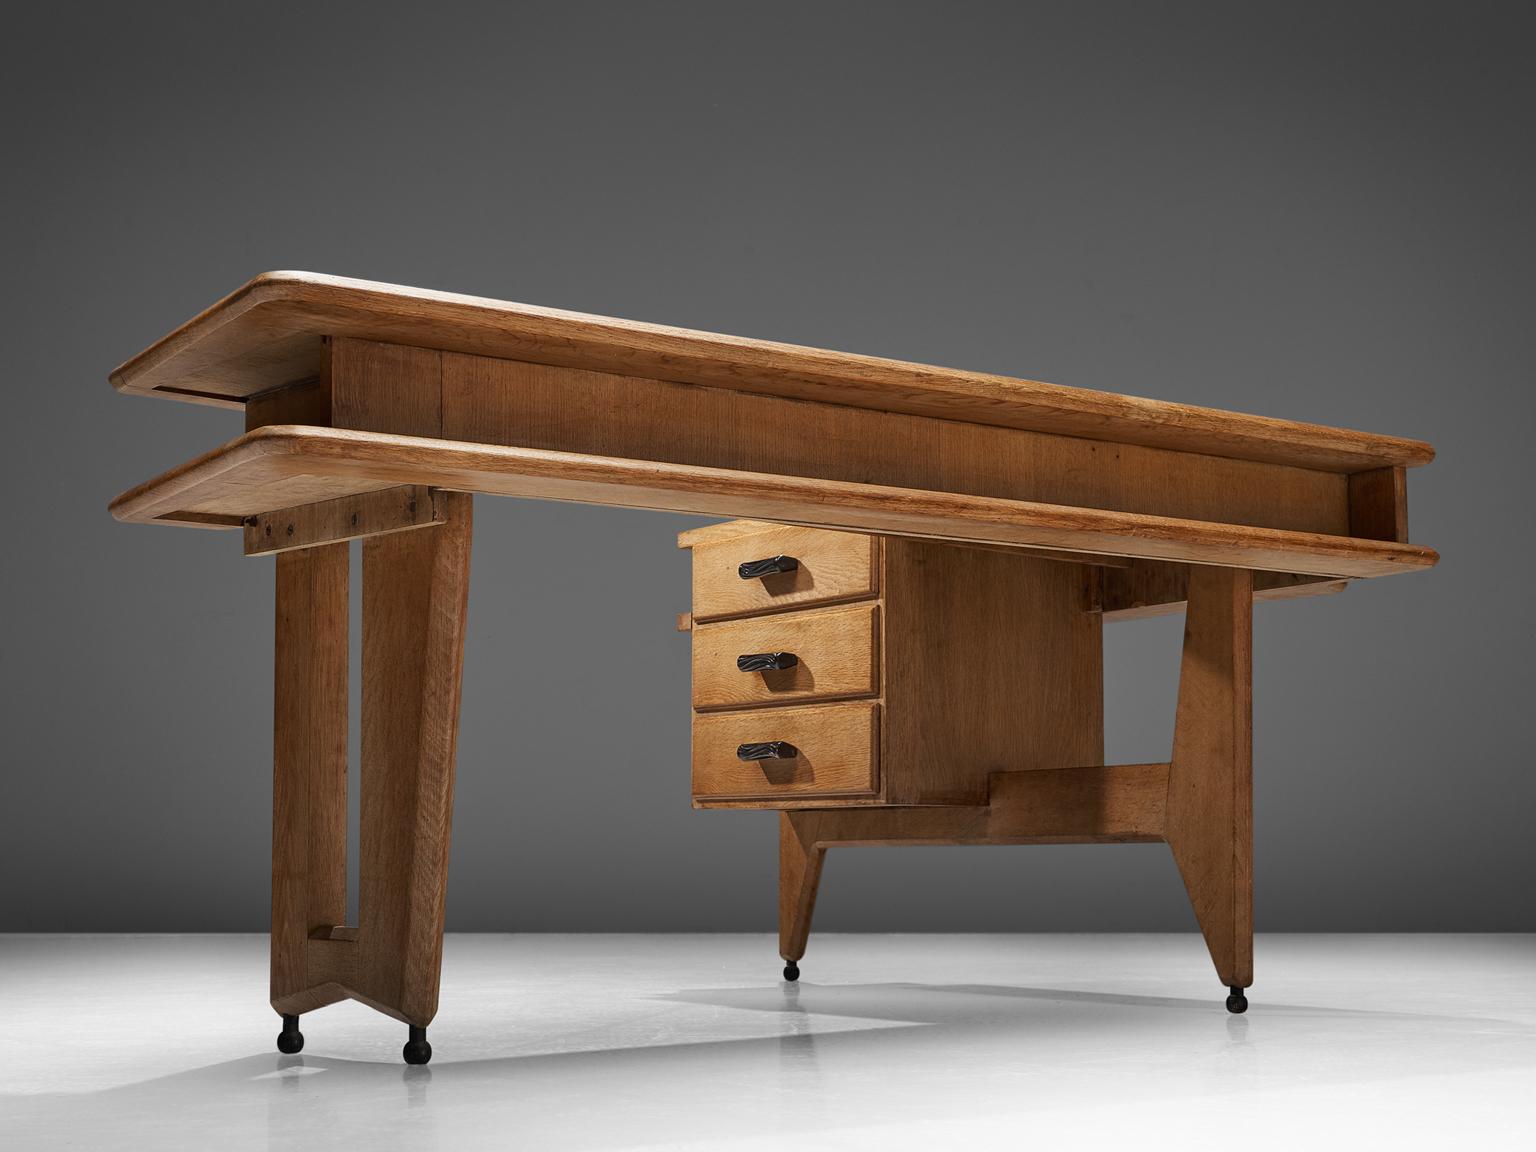 Guillerme & Chambron, desk in oak, France, 1960s.

This desk and return, is executed in solid oak by French designers Guillerme et Chambron. This elegant corner desk shows interesting details. First there is the shaped of the top, which is